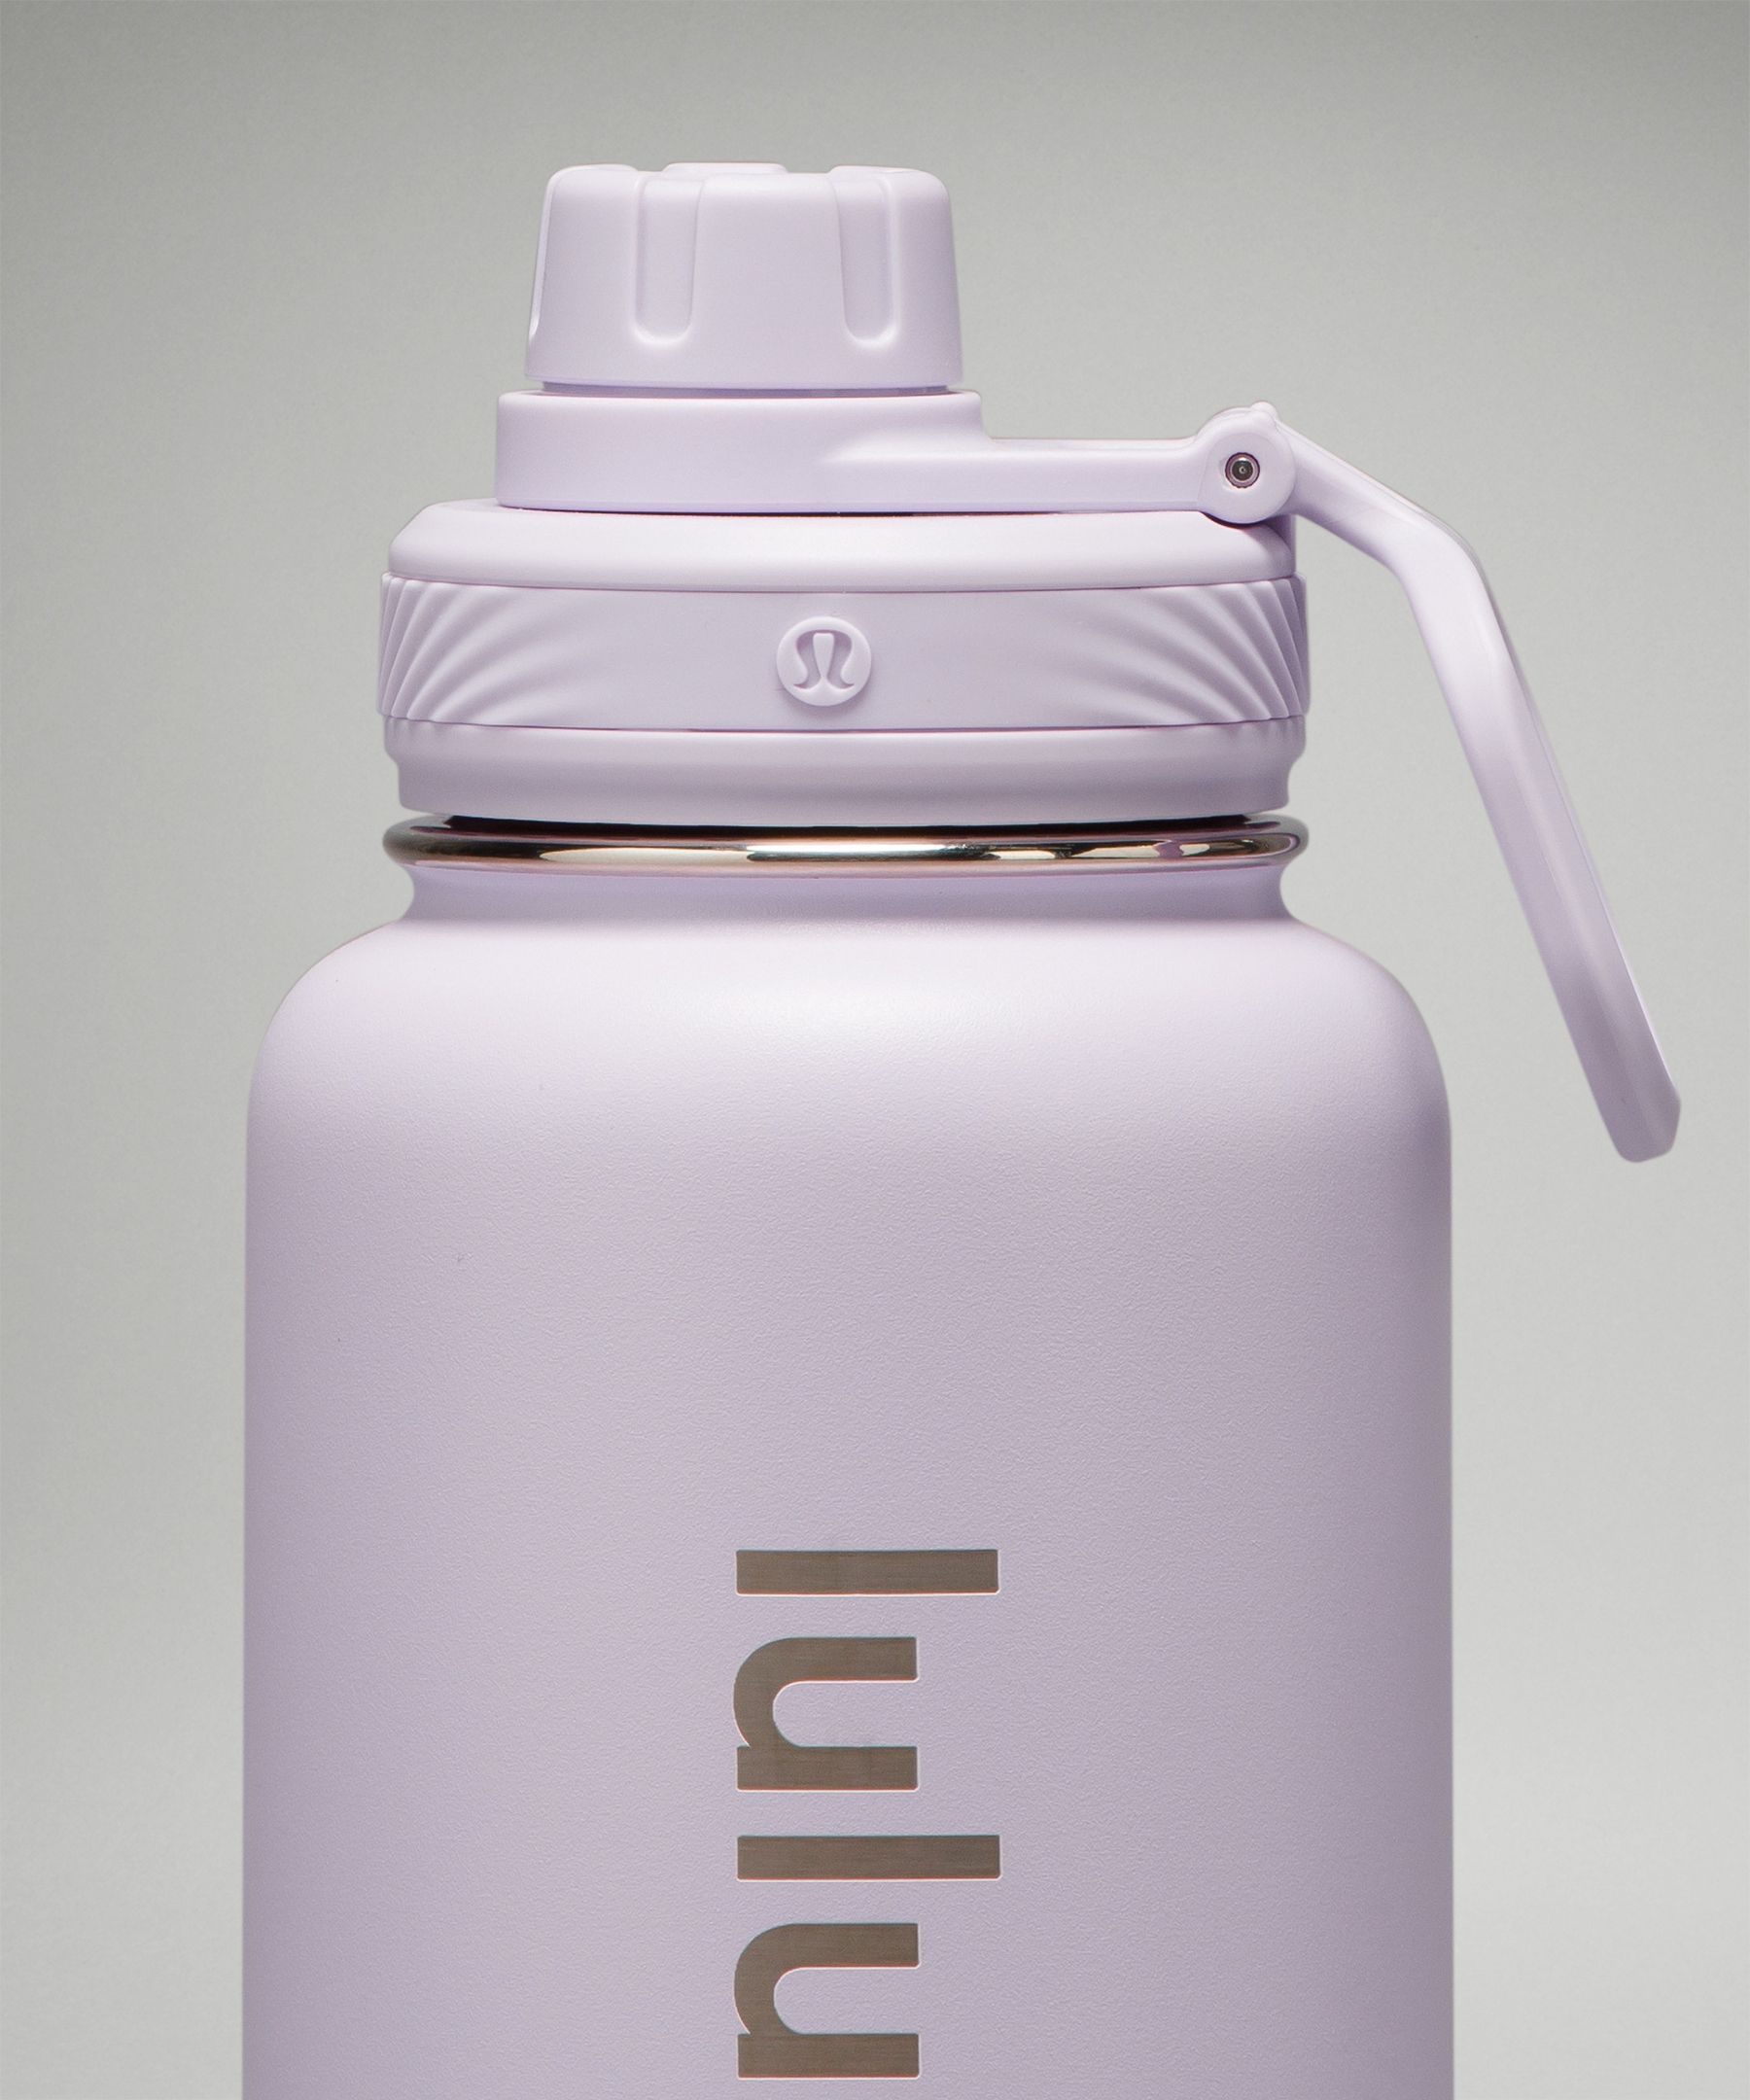 IN STOCK] Lululemon Sports Water Bottle Outdoor Thermal Water Cup Yoga  Water Bottle